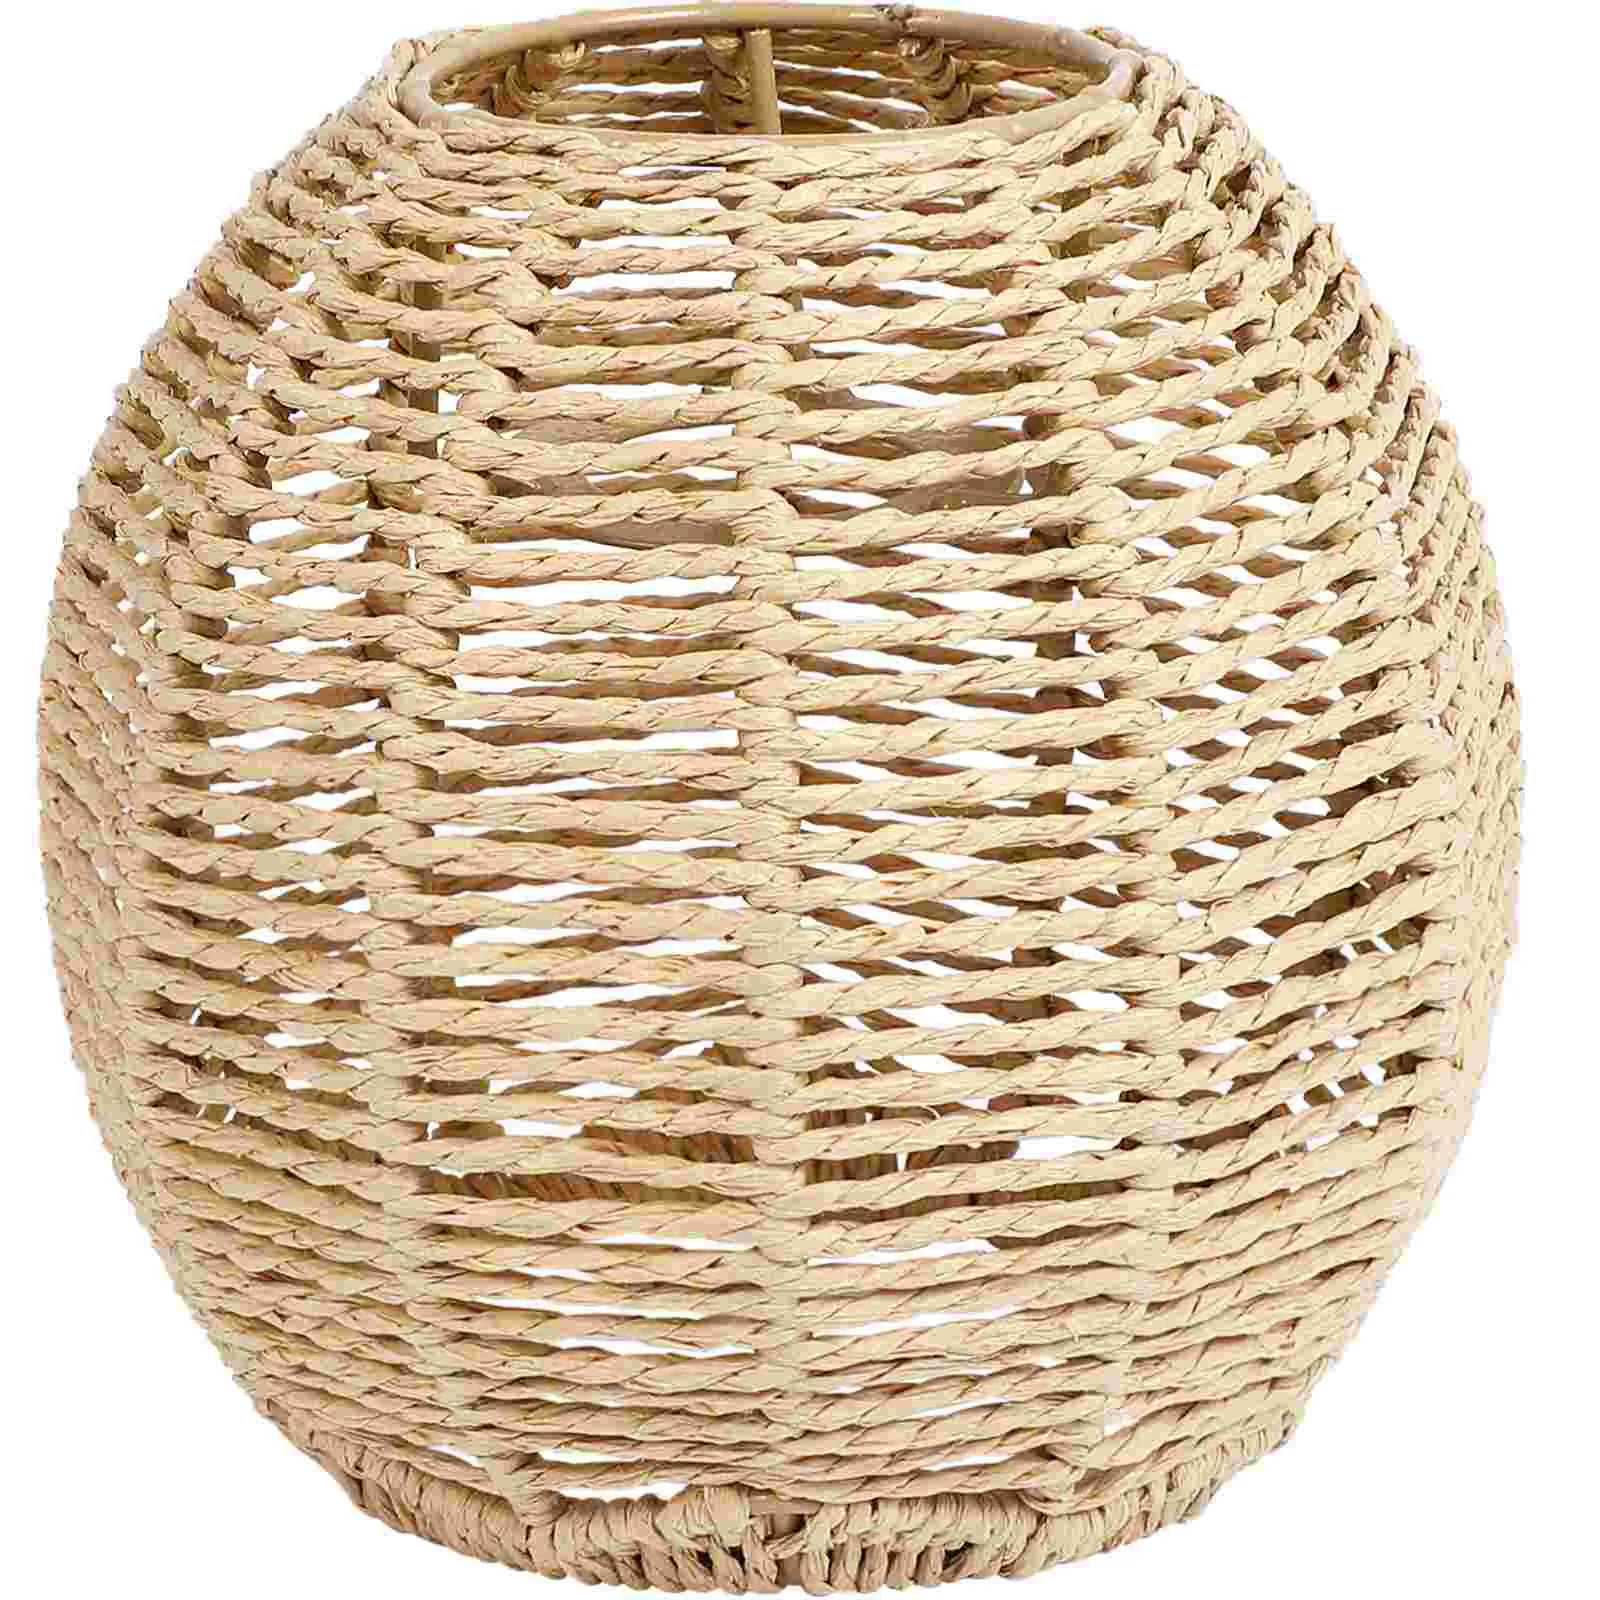 

Woven Lamp Shade Imitation Rattan Lampshade Light Cover Decorate Bulb Basket Chandelier